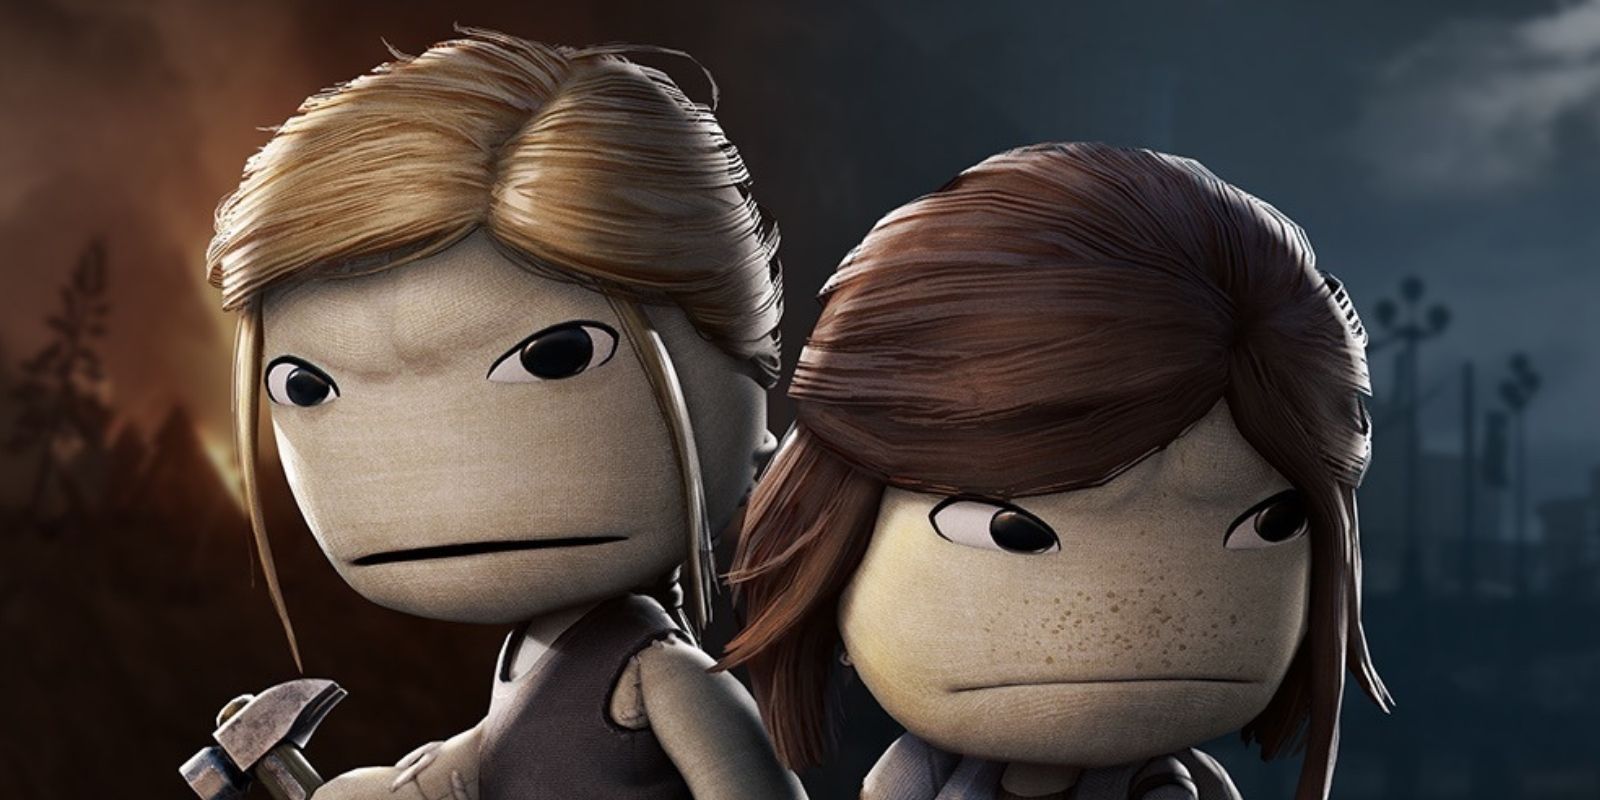 Image posted by Sackboy